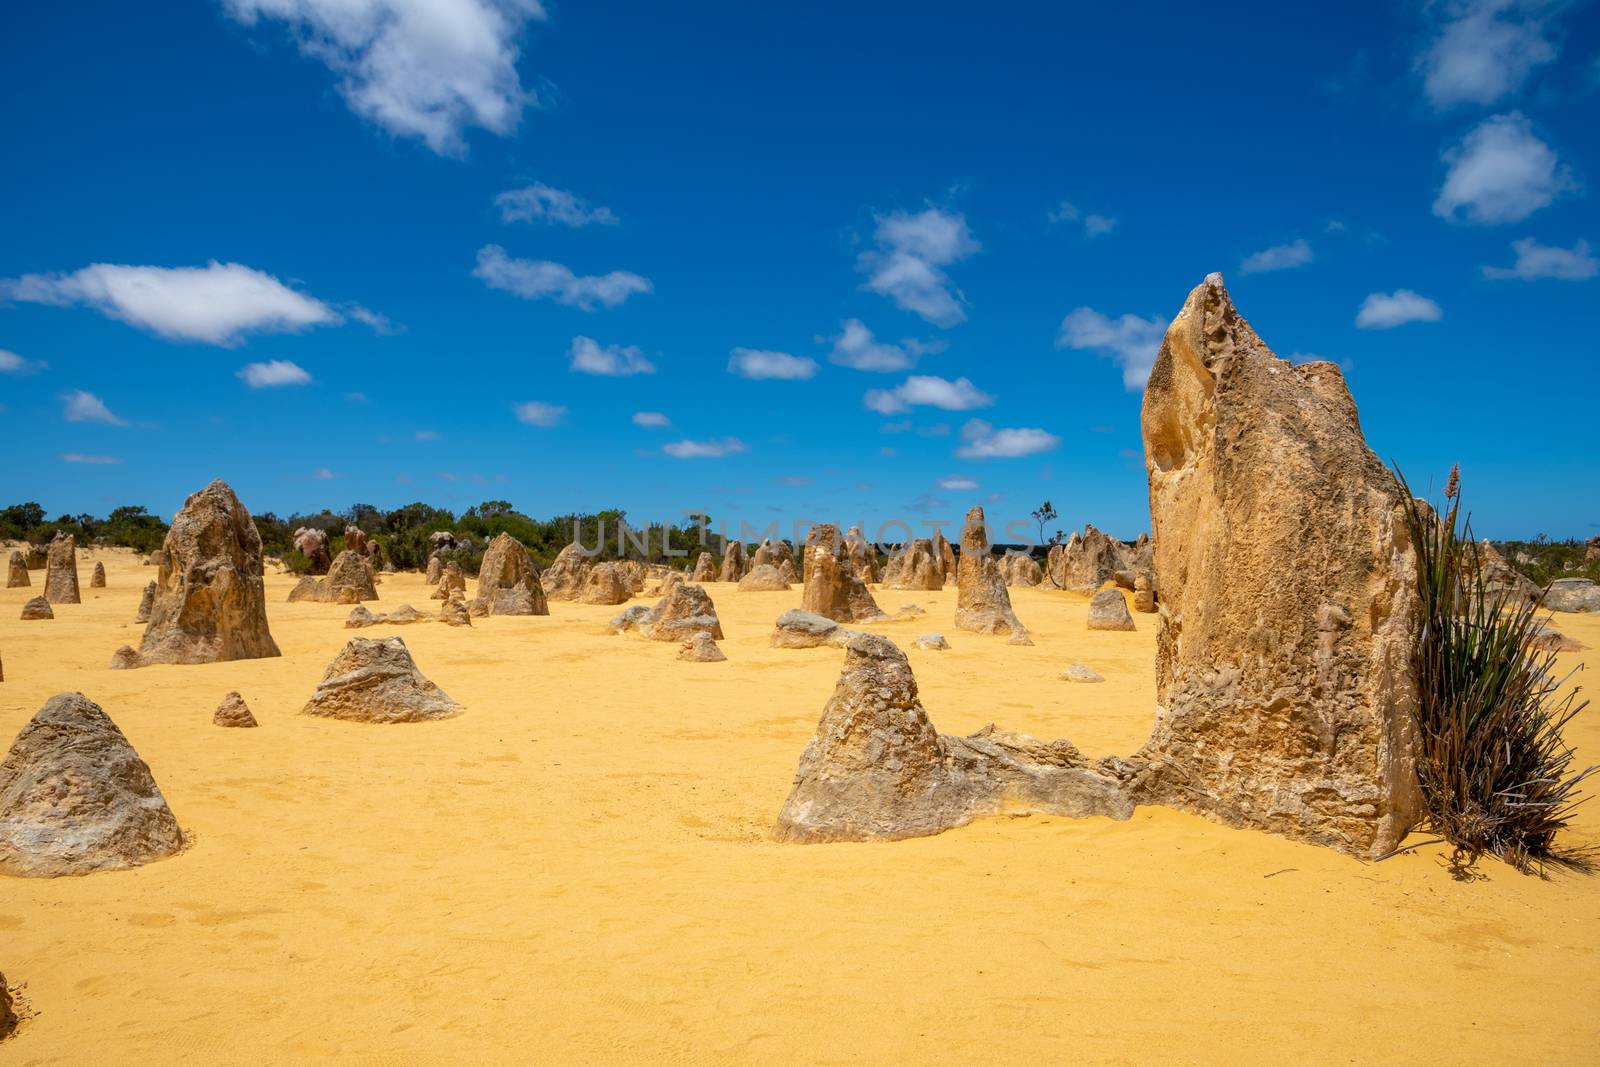 Upright standing rocks at the Pinnacles Desert in the west of Australia